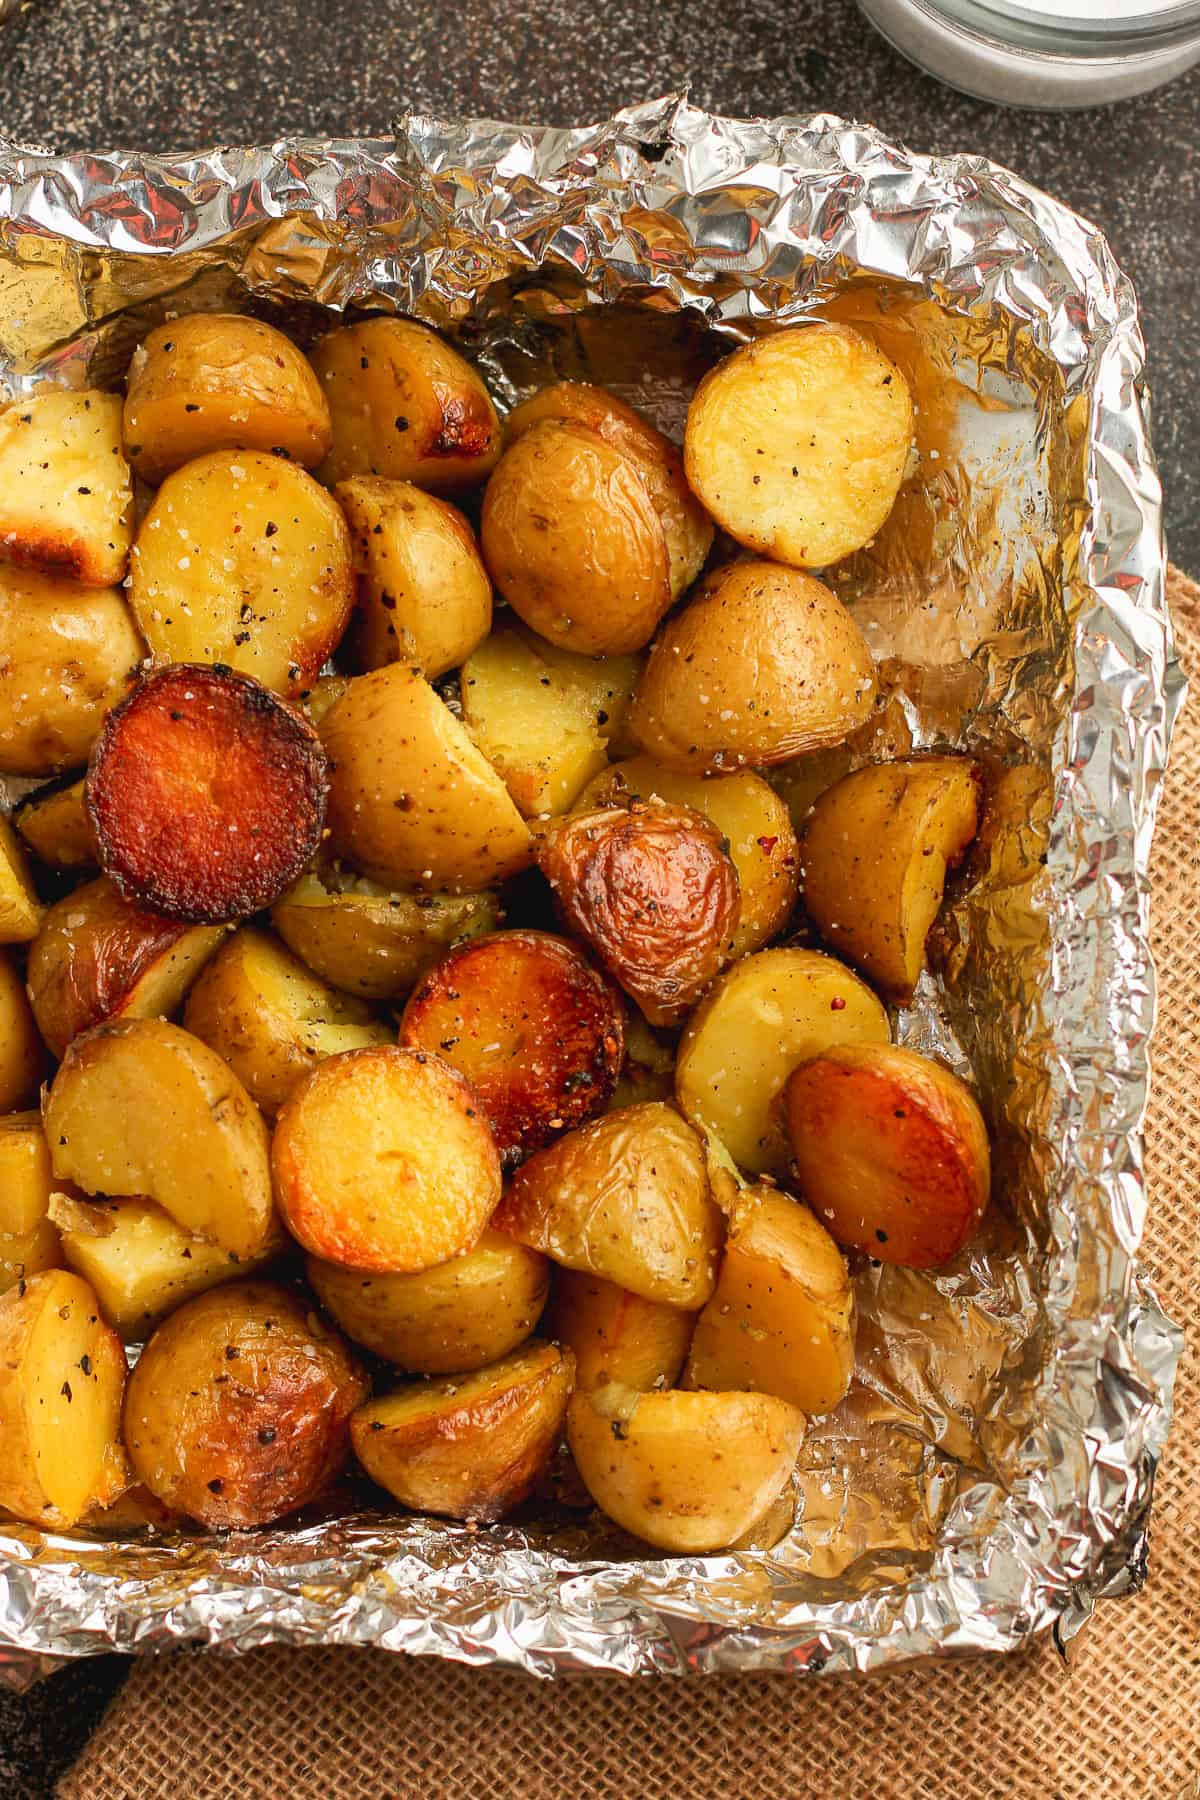 Small Potatoes on the Grill